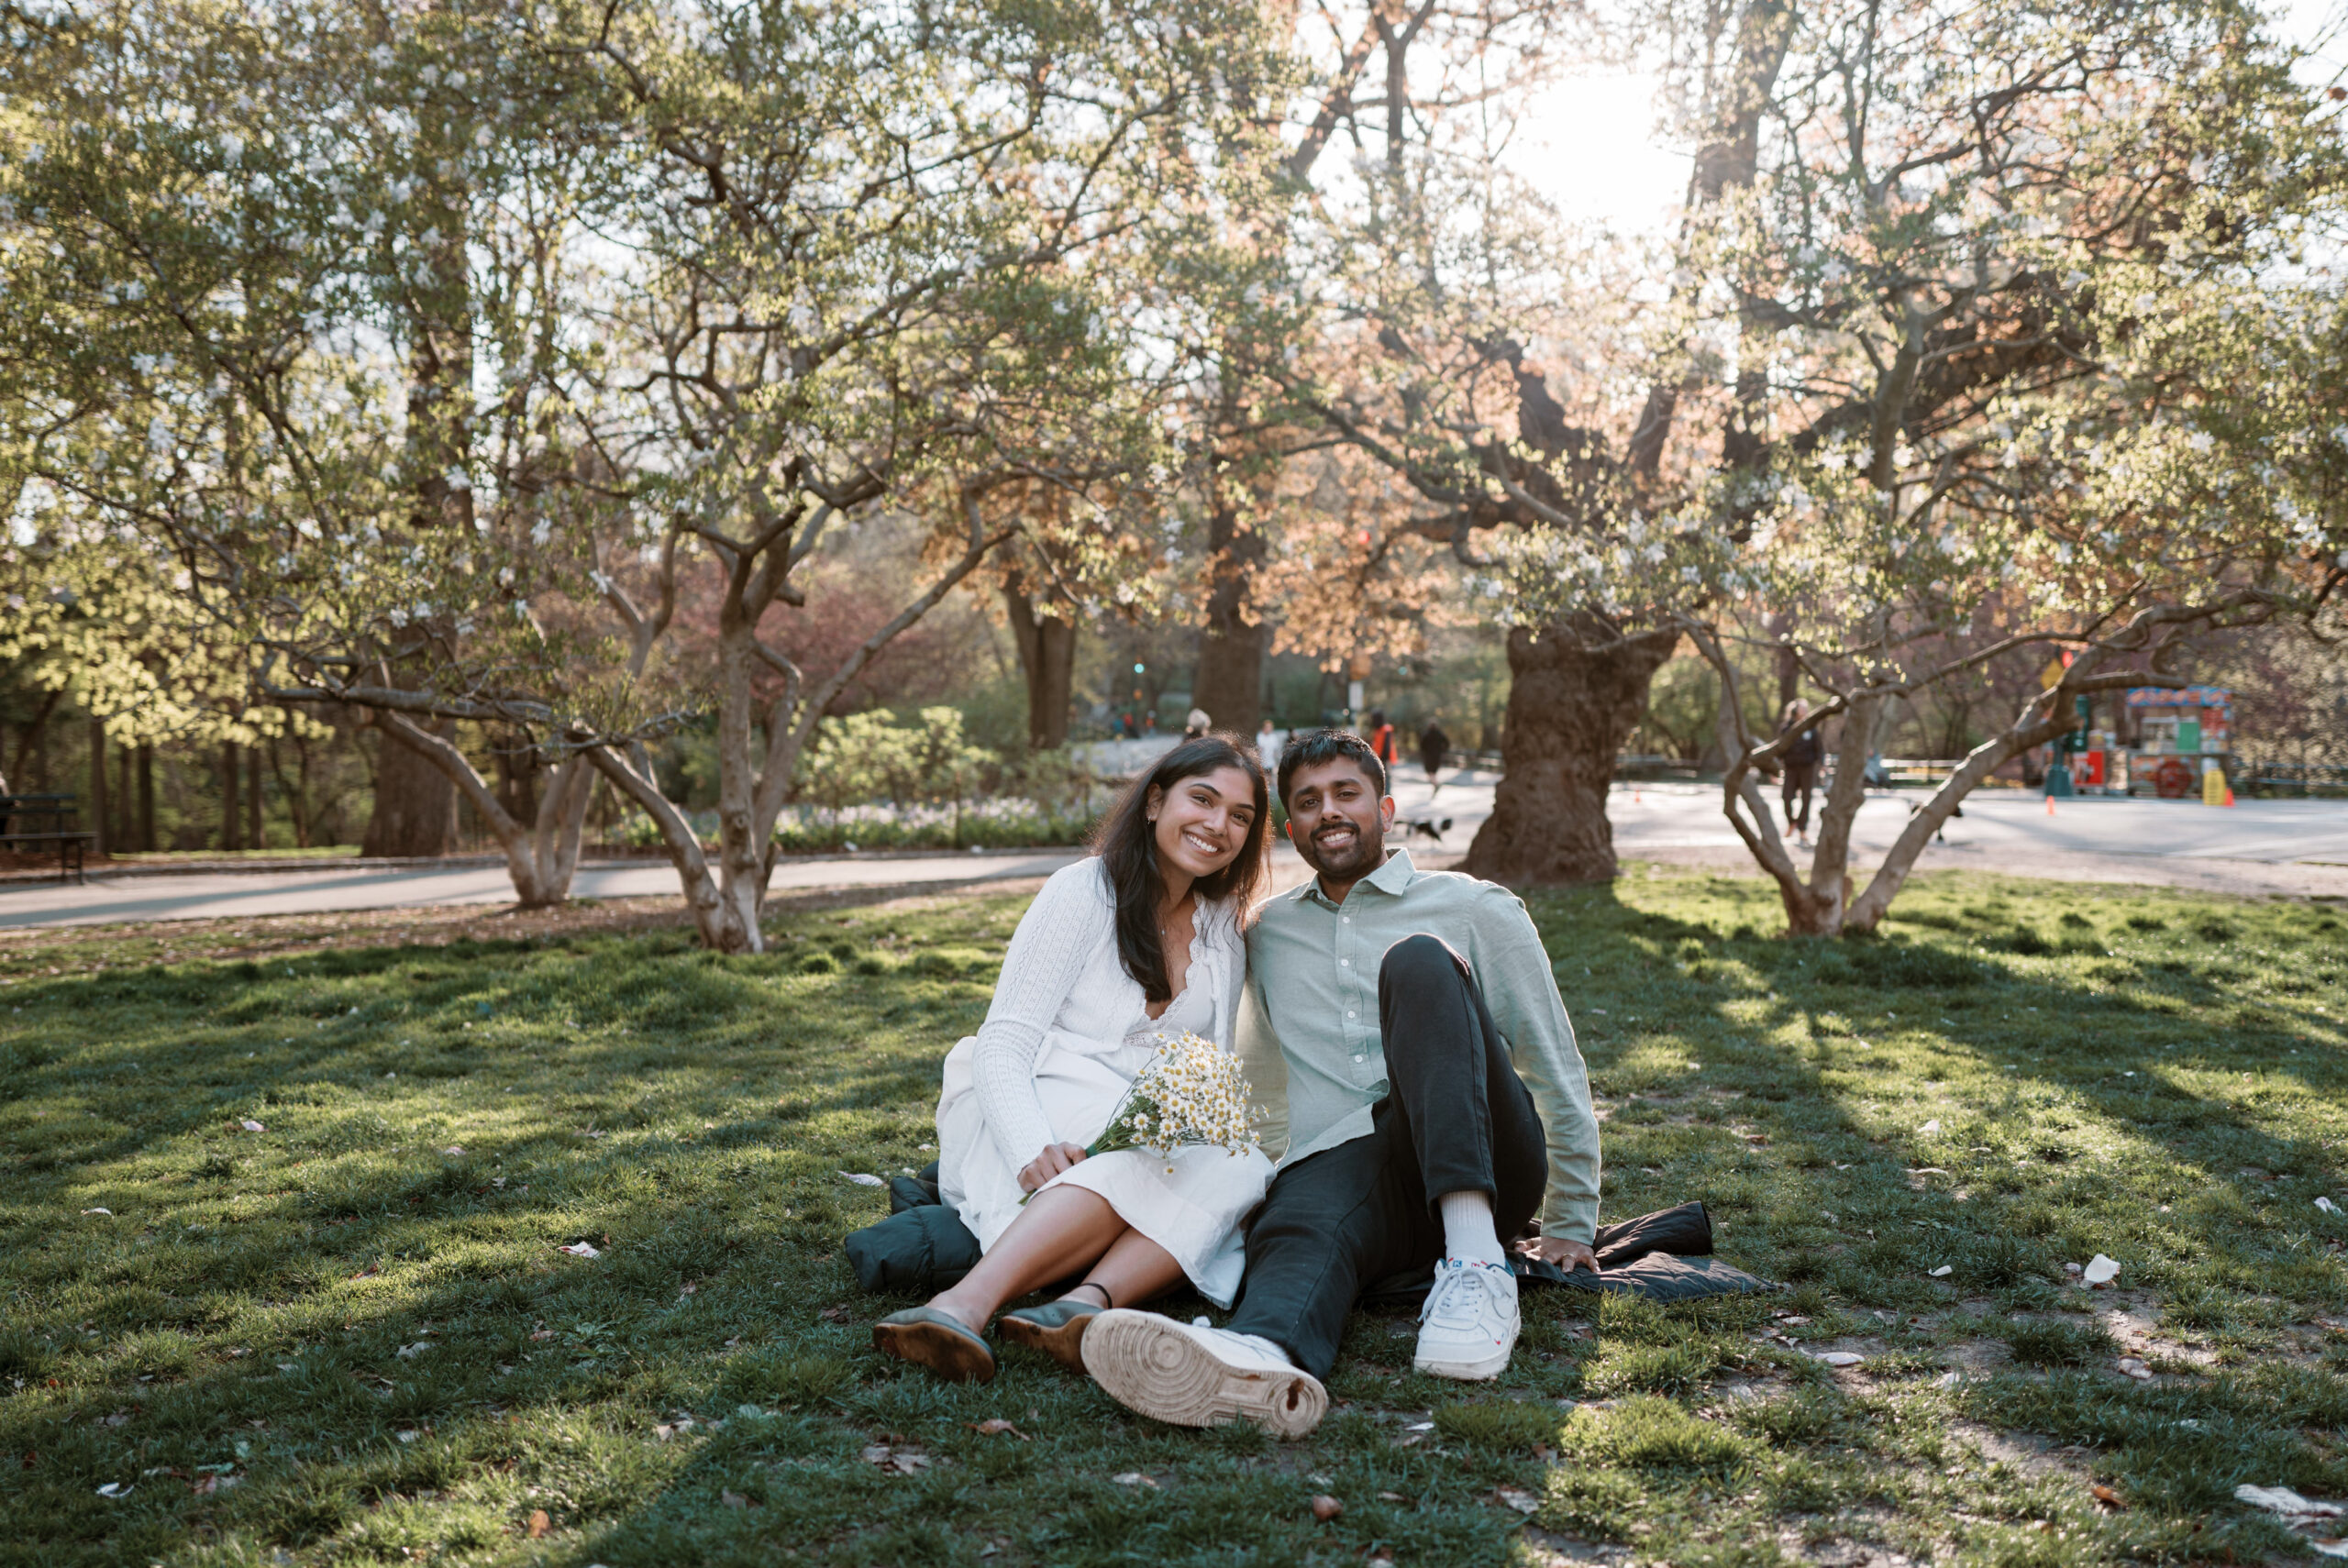 The engaged couple is happily sitting on the grass in Central Park, NYC, in spring. Image by Jenny Fu Studio